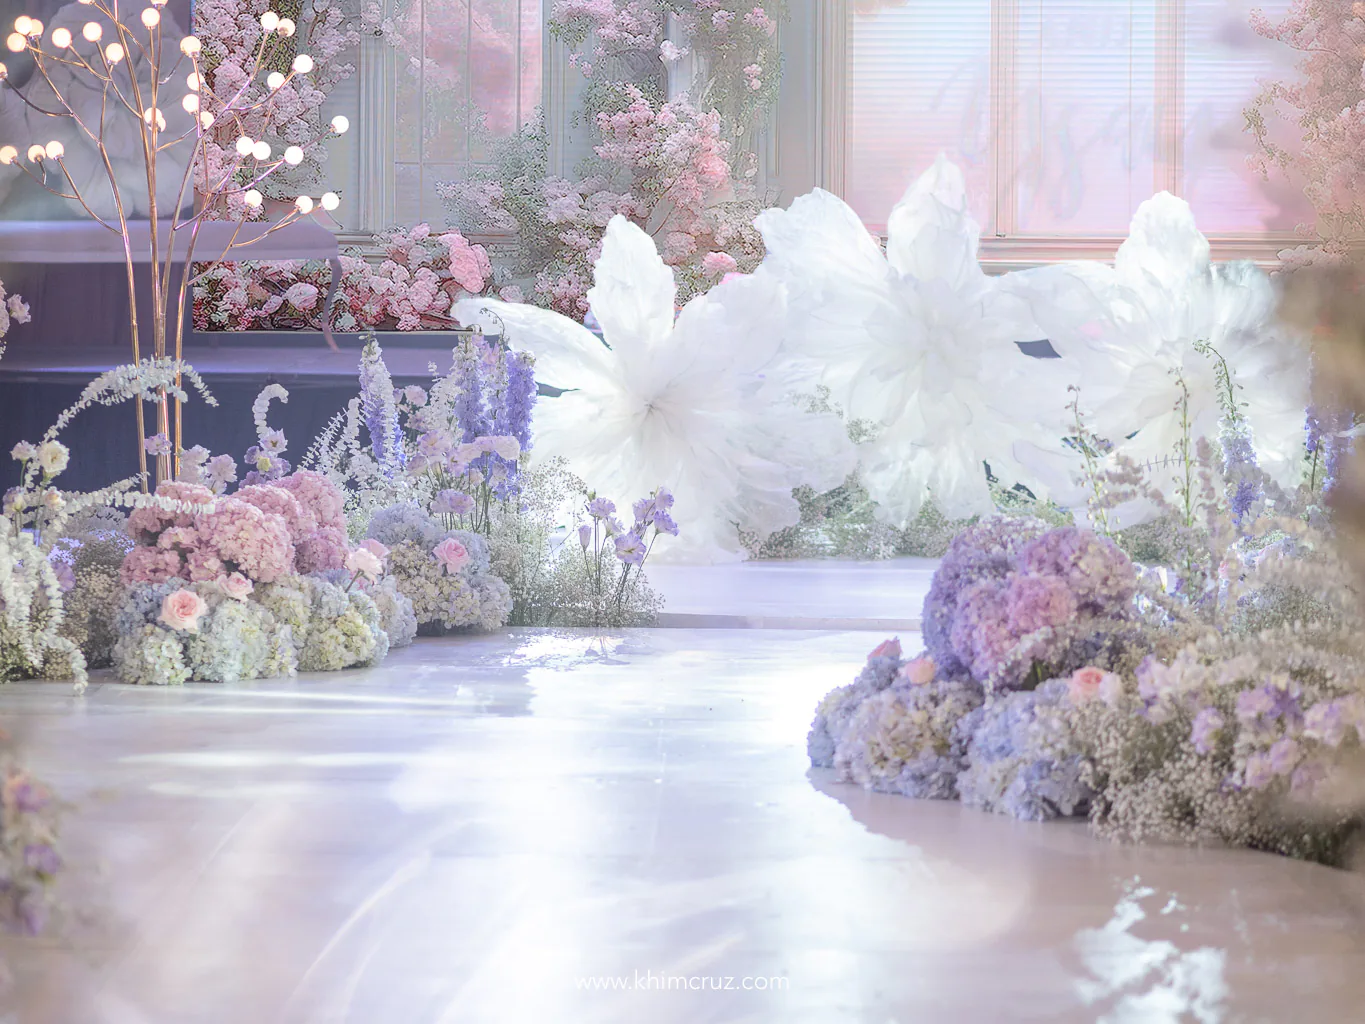 dreamy florals at the dance floor